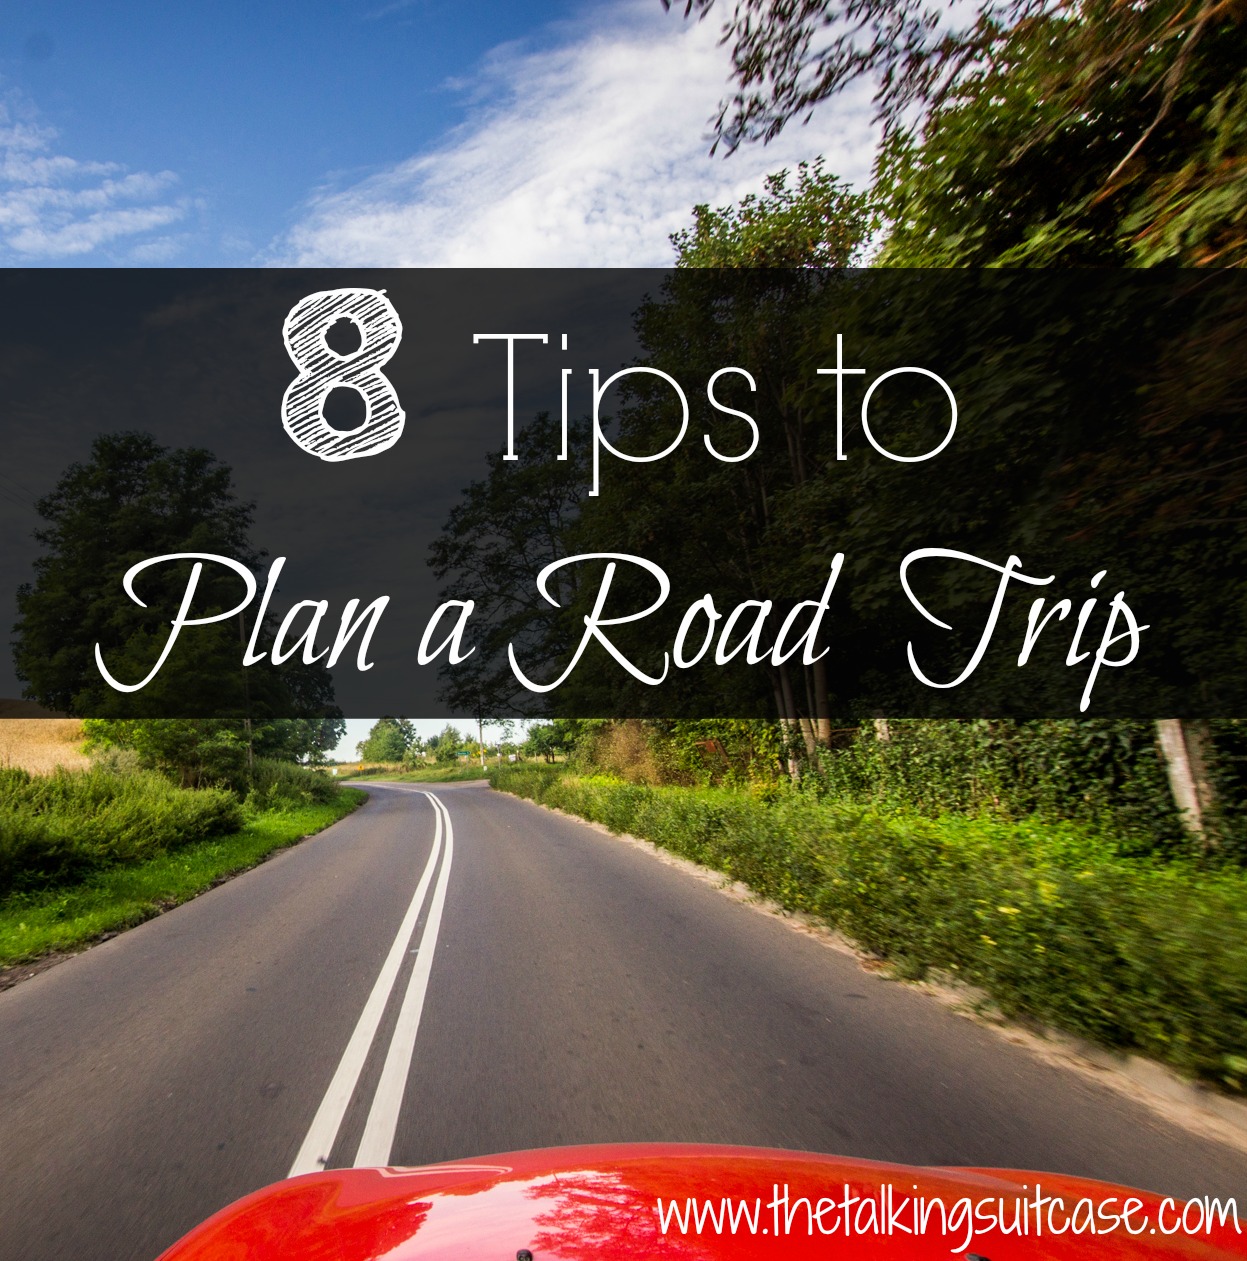 8 Simple Tips to Plan a Road Trip & Pack Smart